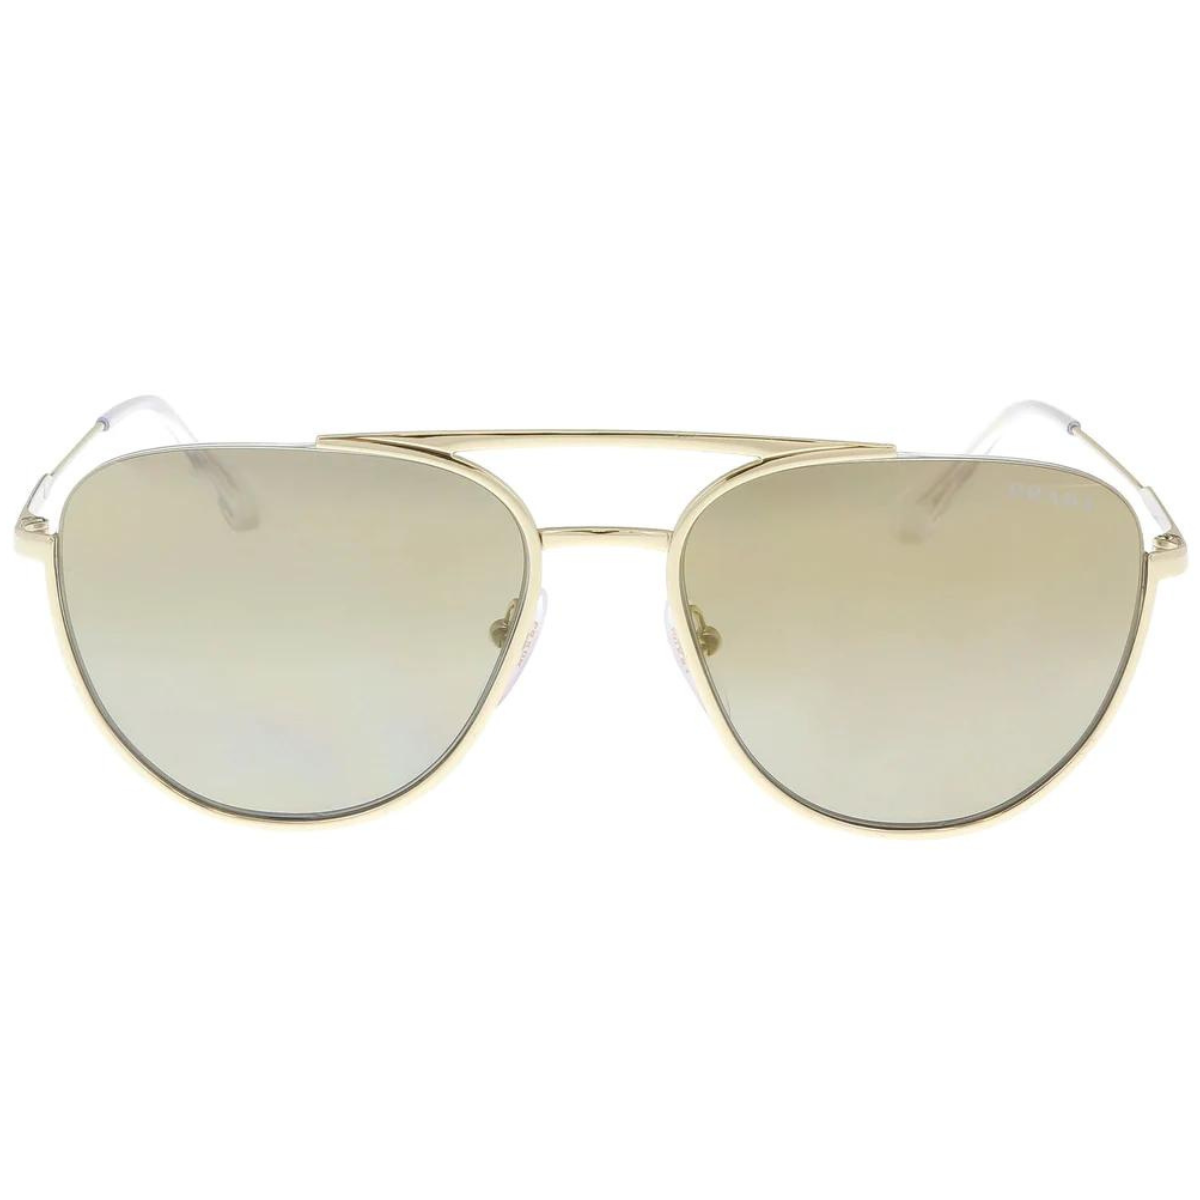 "Find your perfect pair of Prada PR 50US ZVN6O0 Aviator Sunglasses for men at Optorium. Explore our collection and shop now to upgrade your style with fashionable men's shades from Prada."